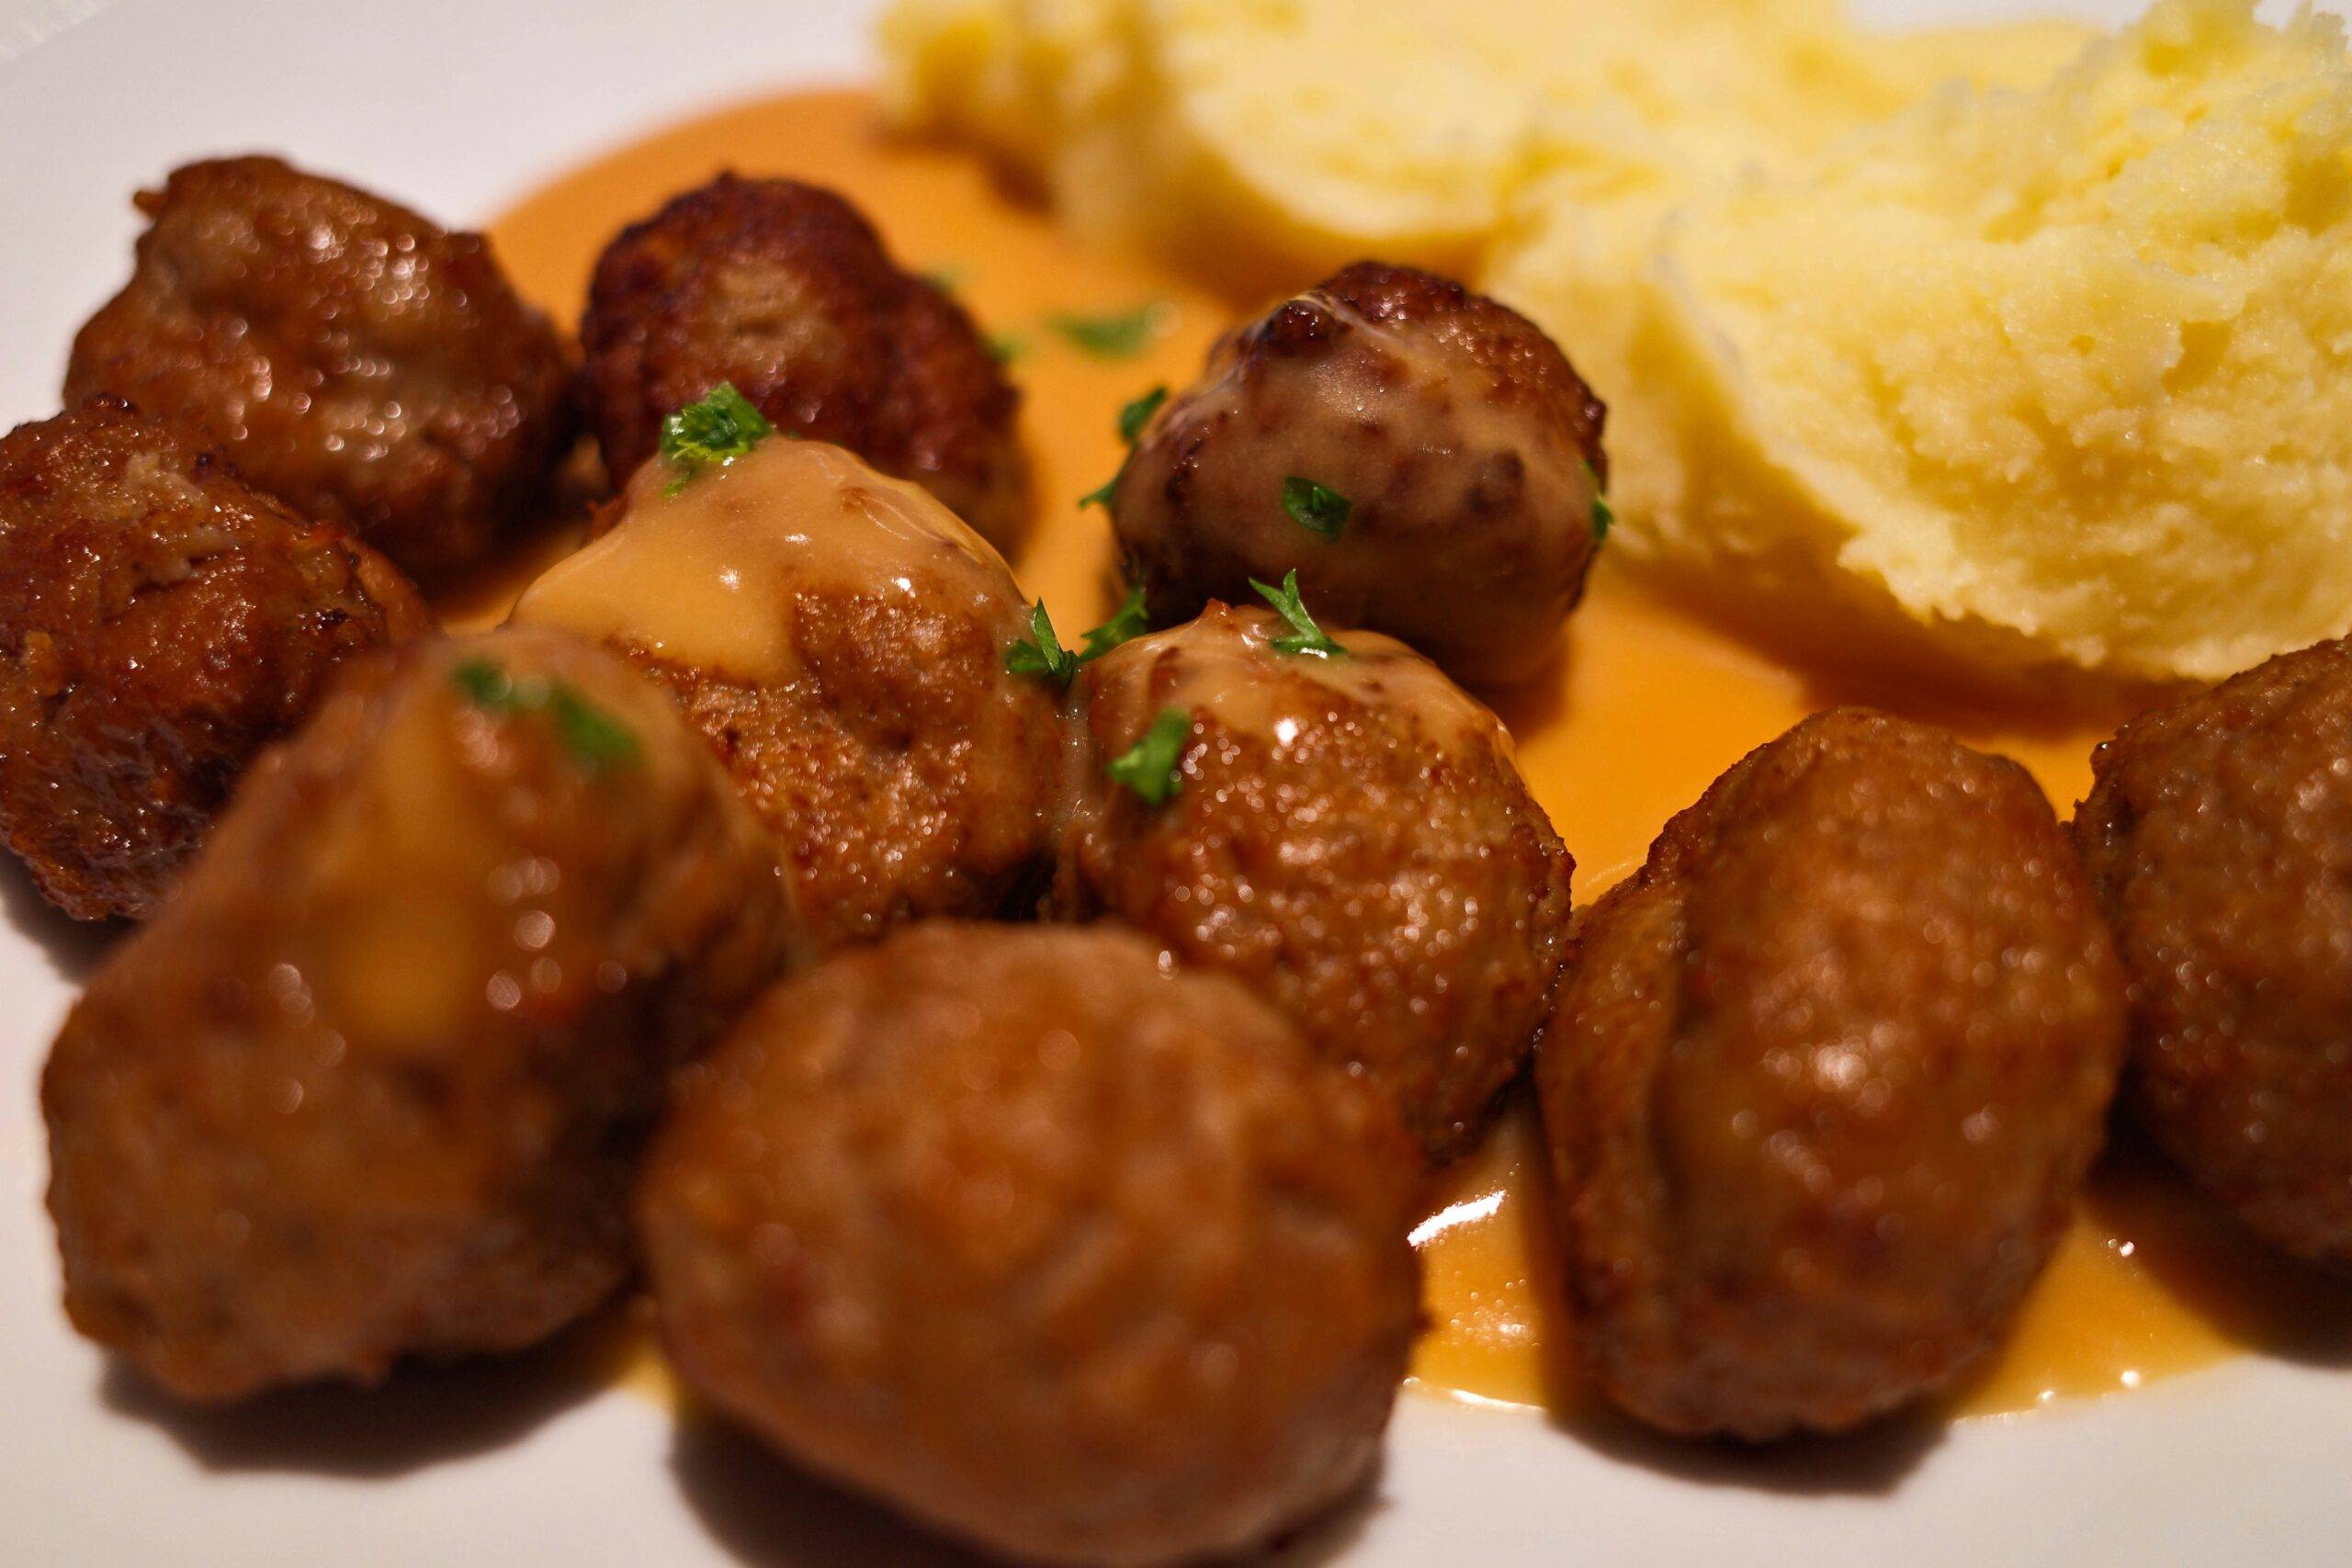 Swedish Meatballs: From the Best Royal Tables to Global Delight